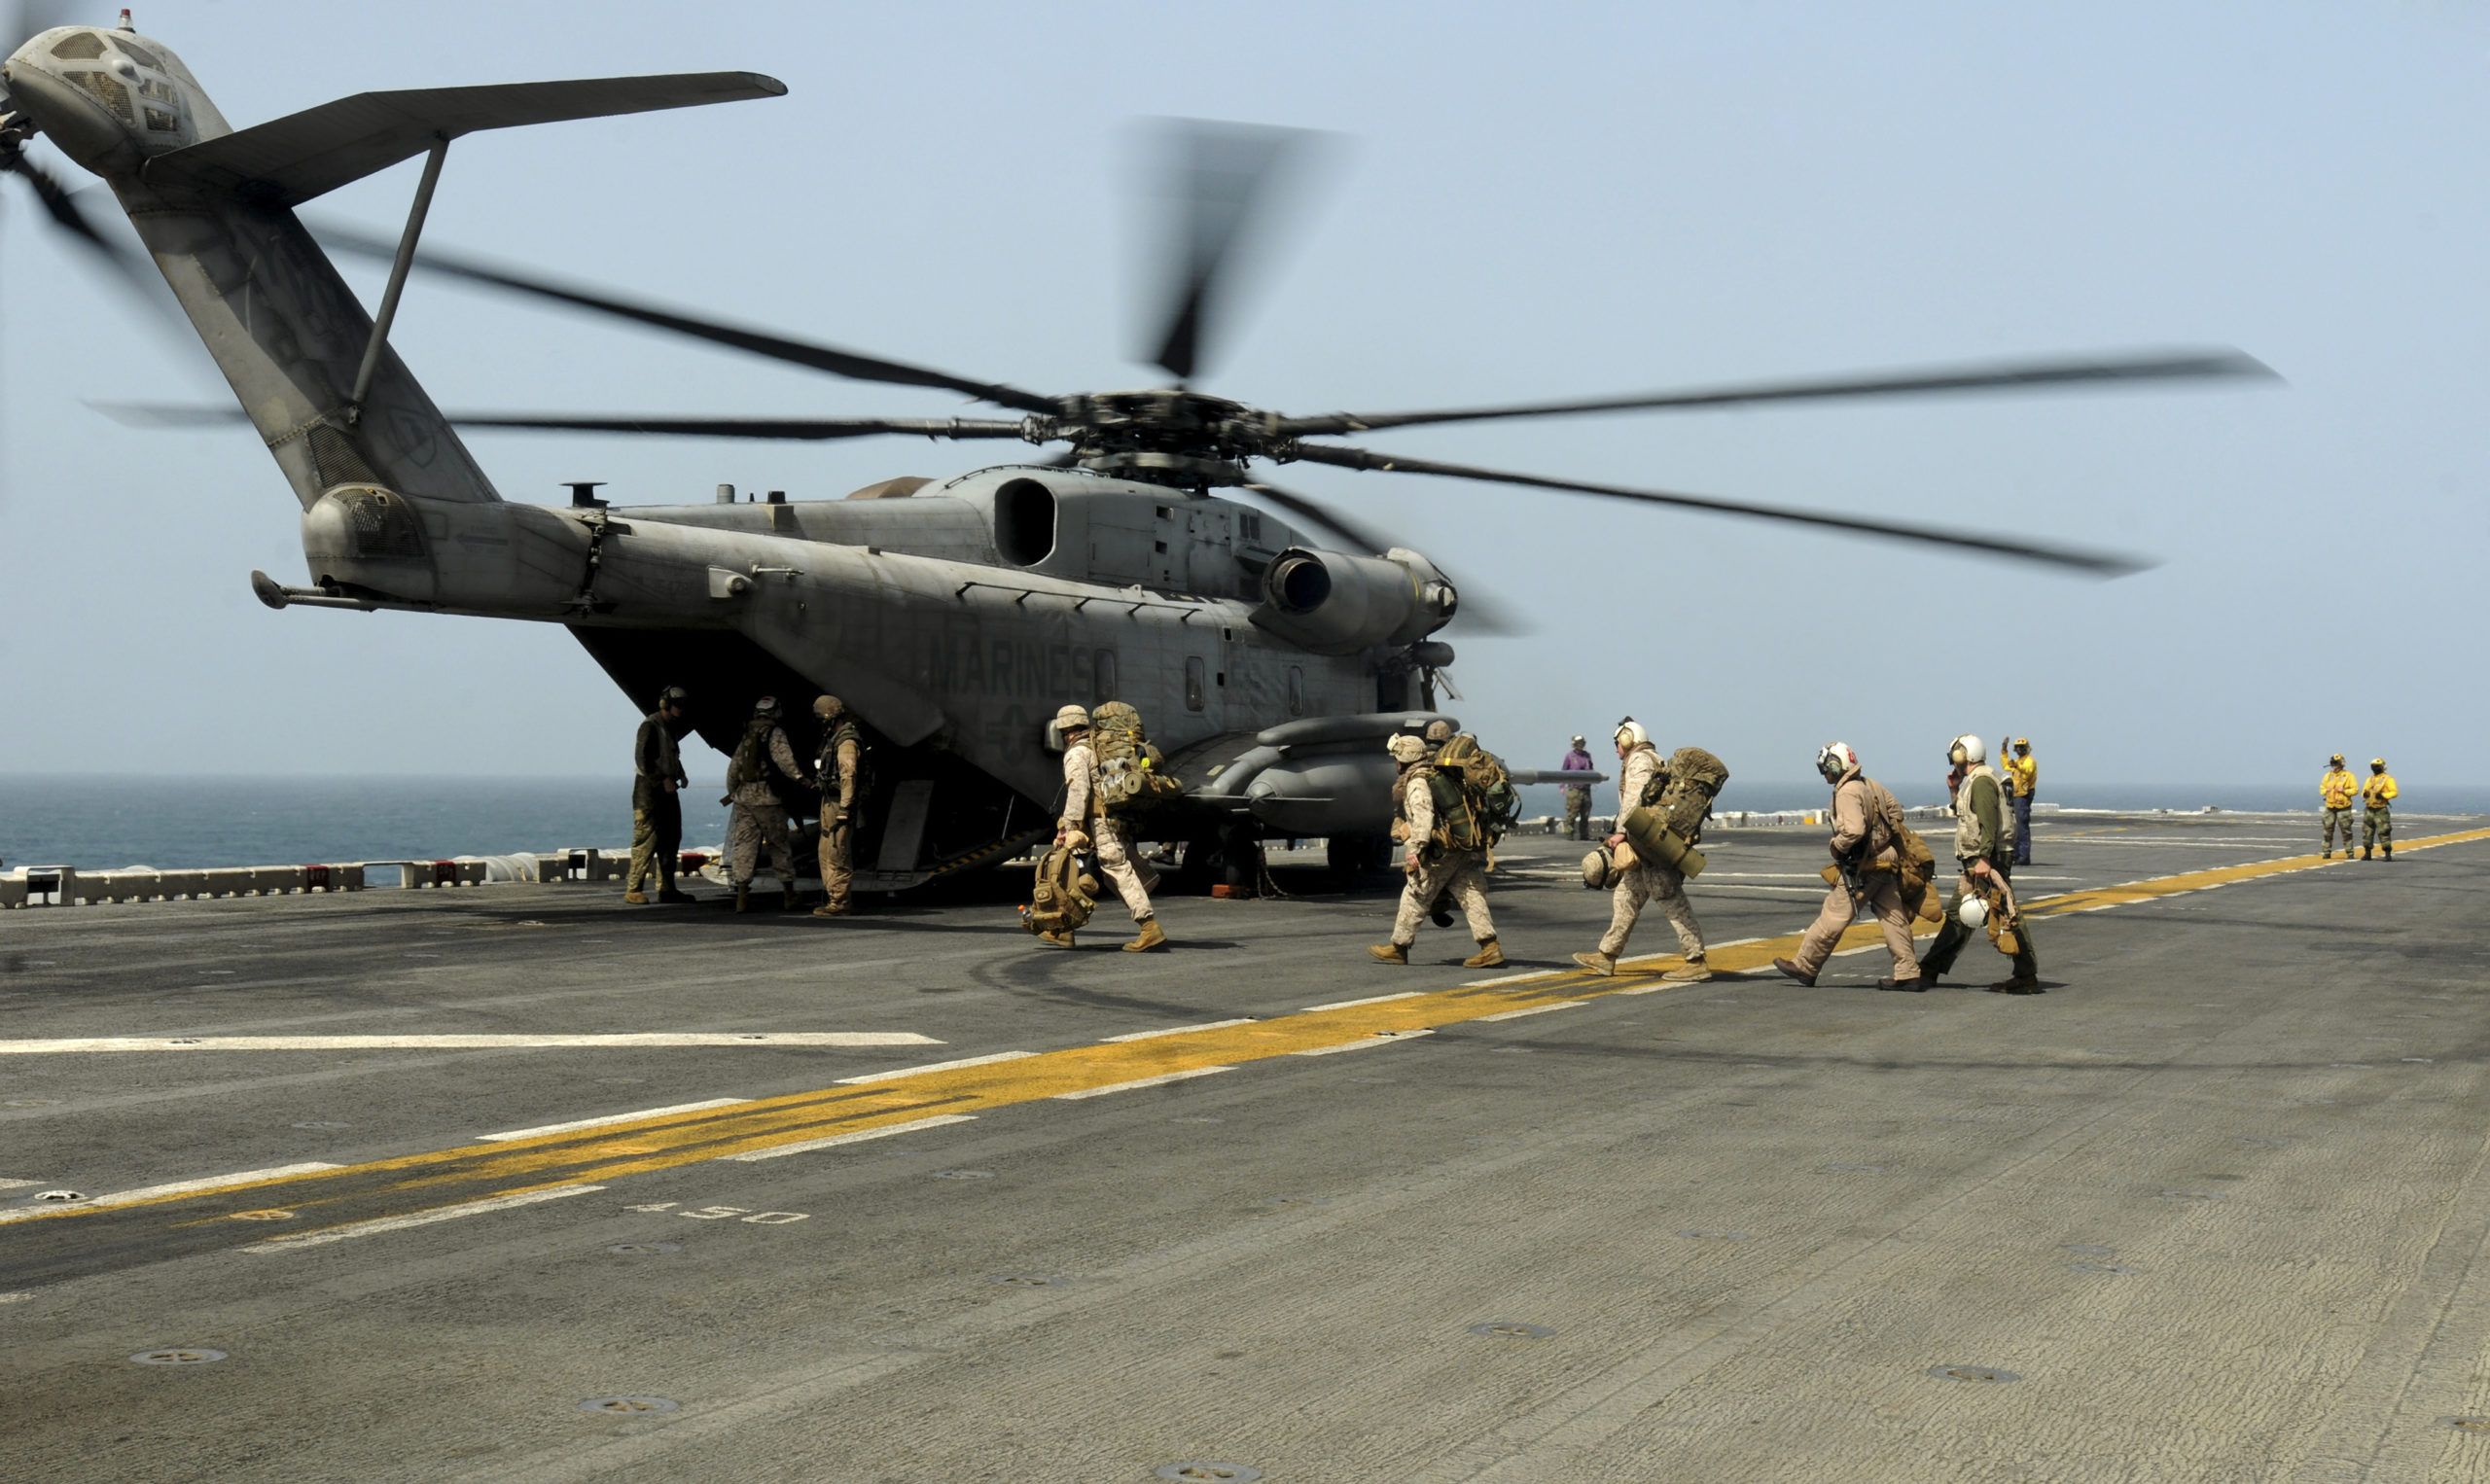 The Top 3 Most Iconic U.S. Military Helicopters